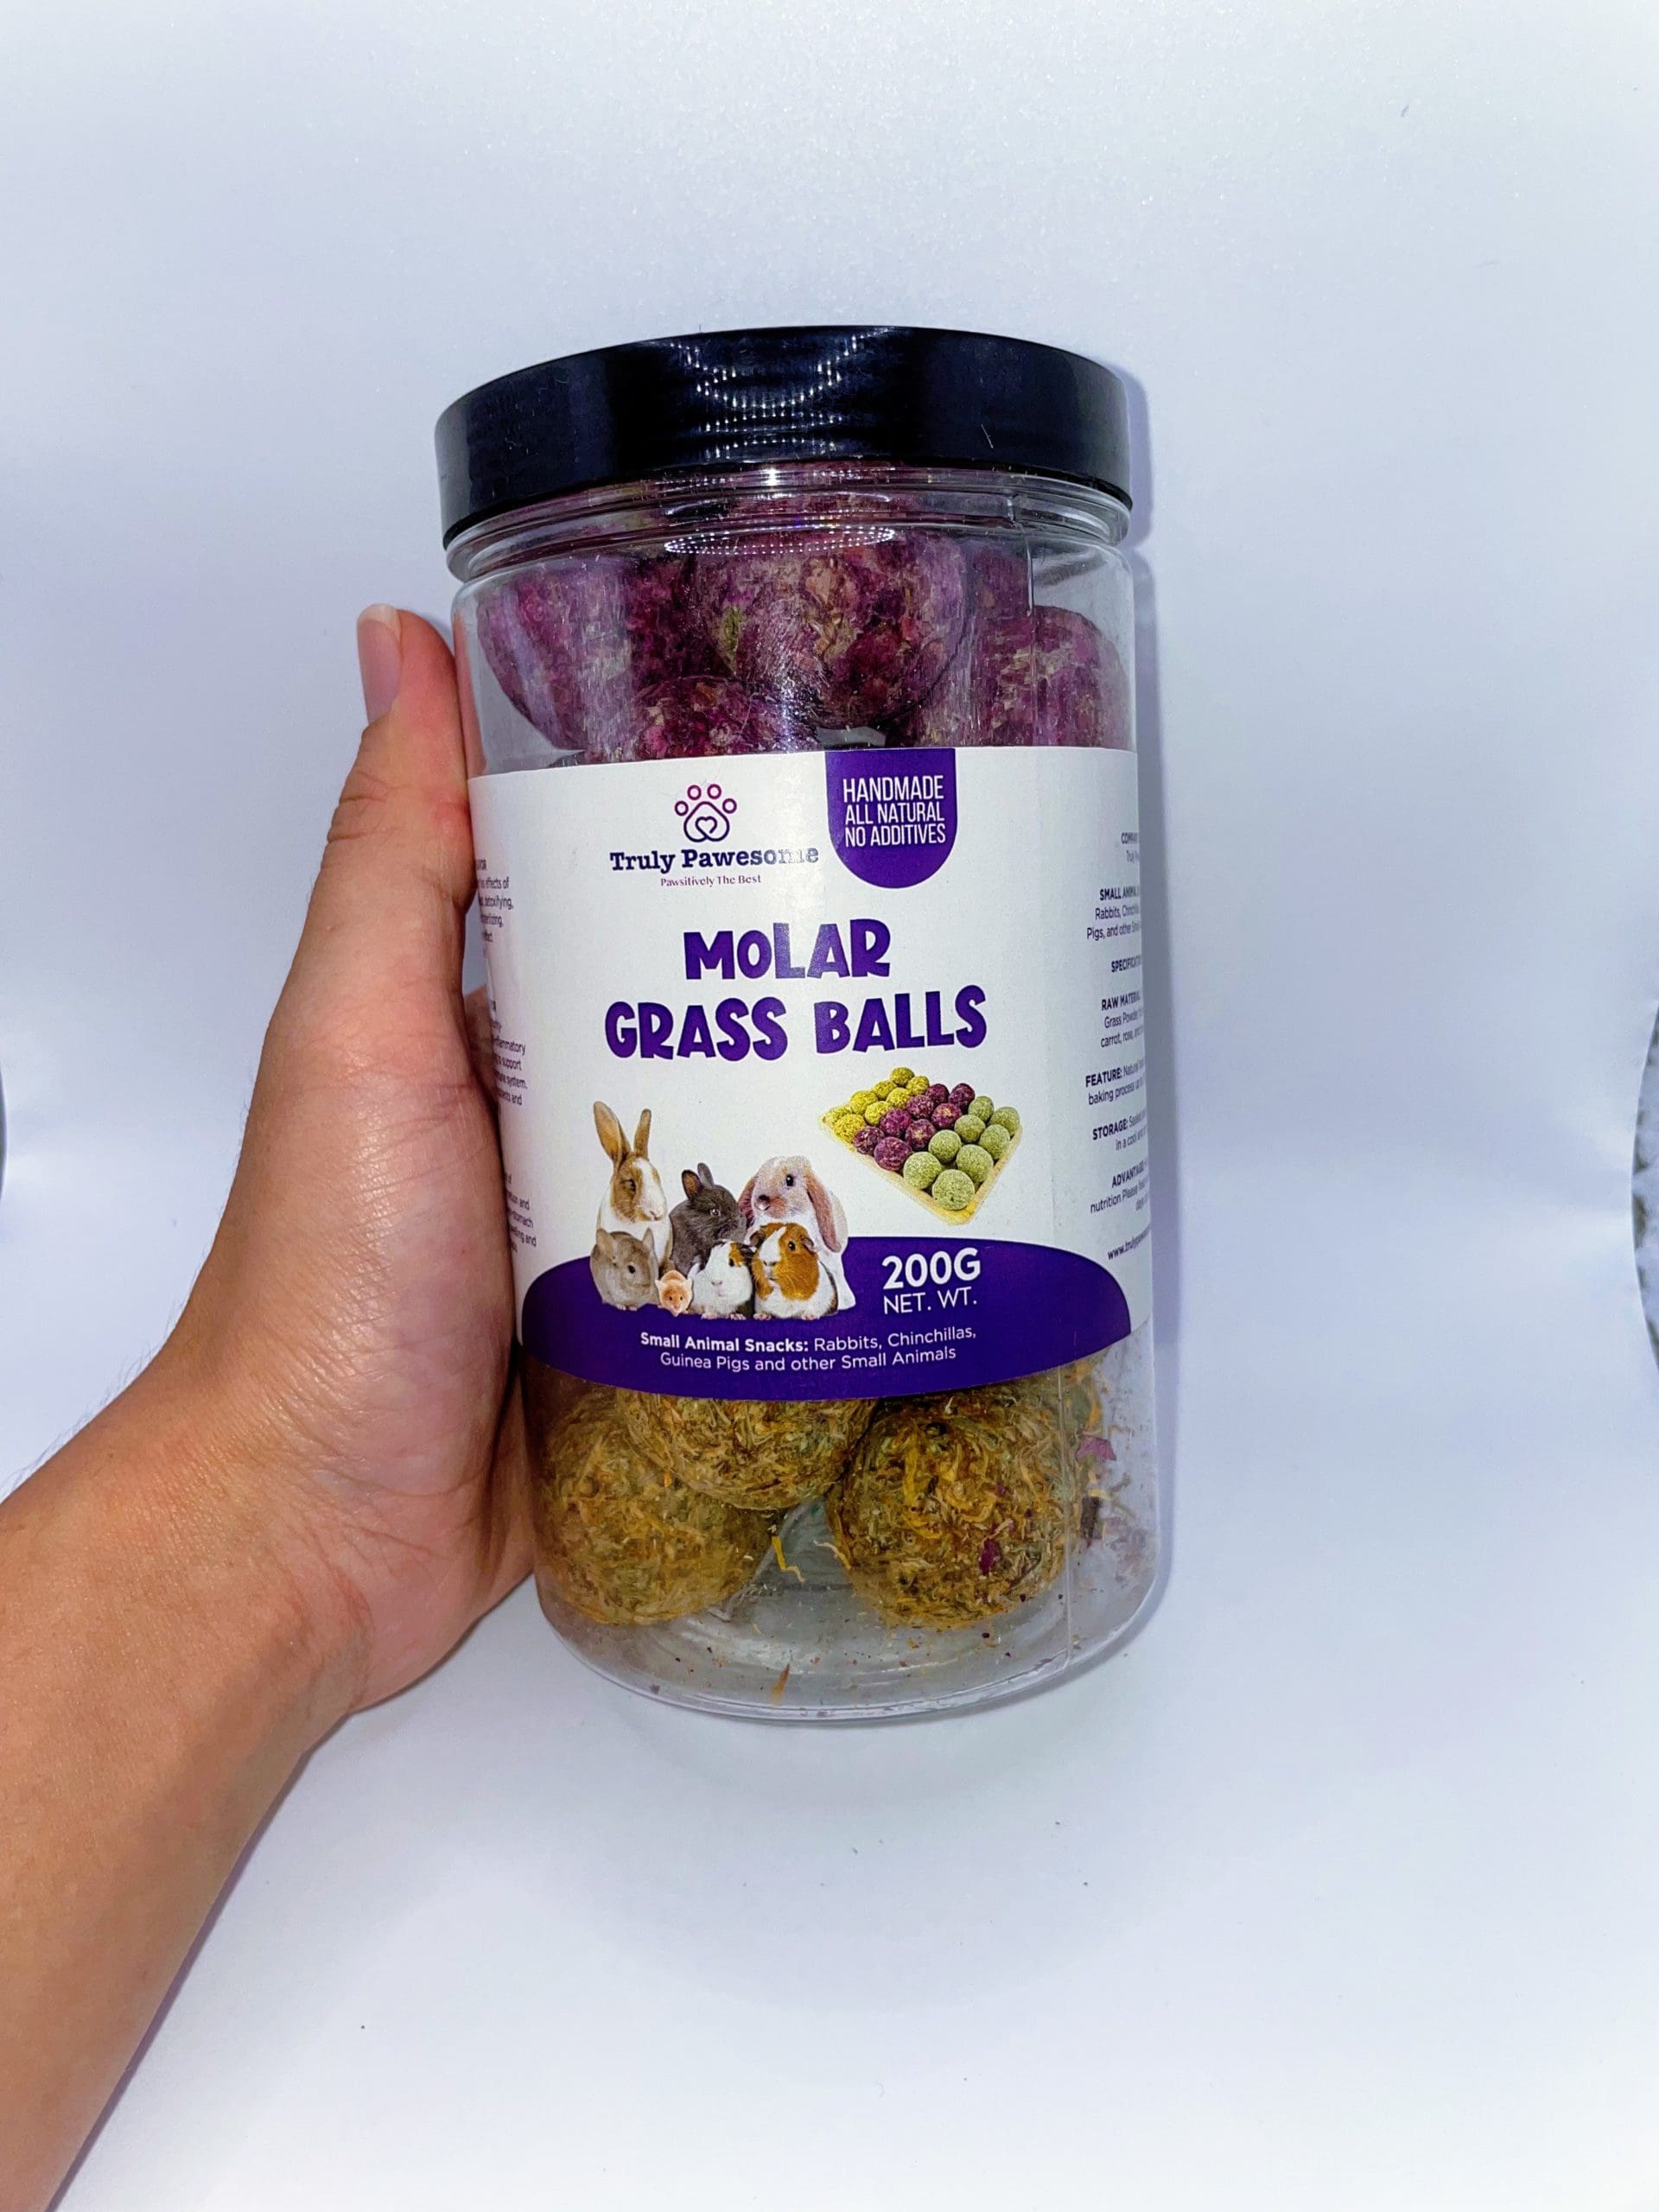 Timothy Hay Floral Grass Ball Treat For Rabbit, Hamsters, Guinea Pigs, Chinchillas and Small Rodents. Timothy Hay Floral Grass Ball Treat For Rabbit, Hamsters, Guinea Pigs, Chinchillas and Small Rodents.